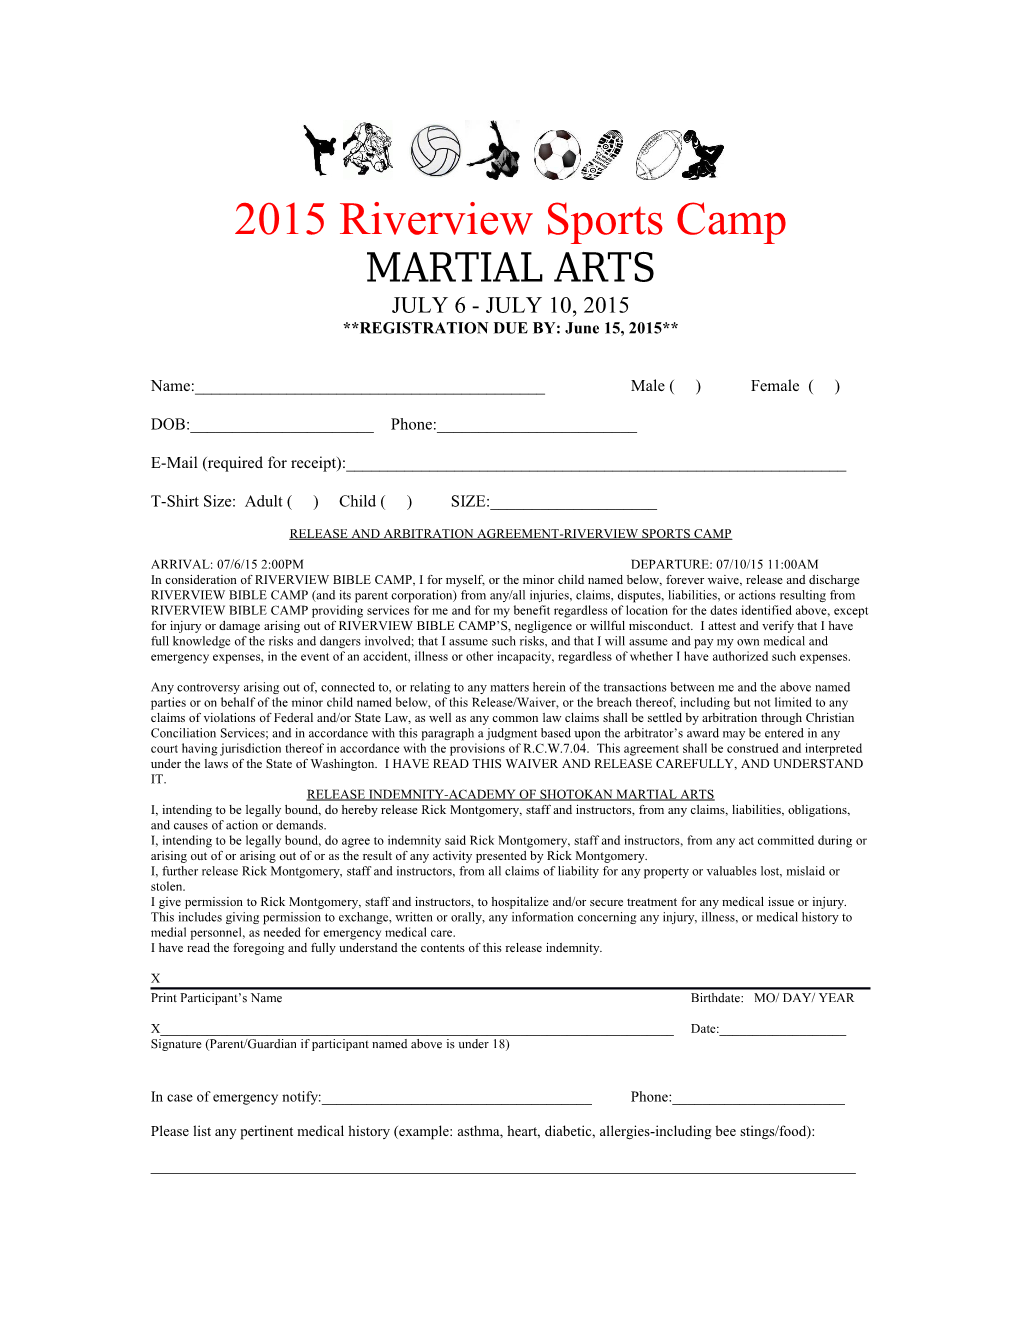 2015 Riverview Sports Camp